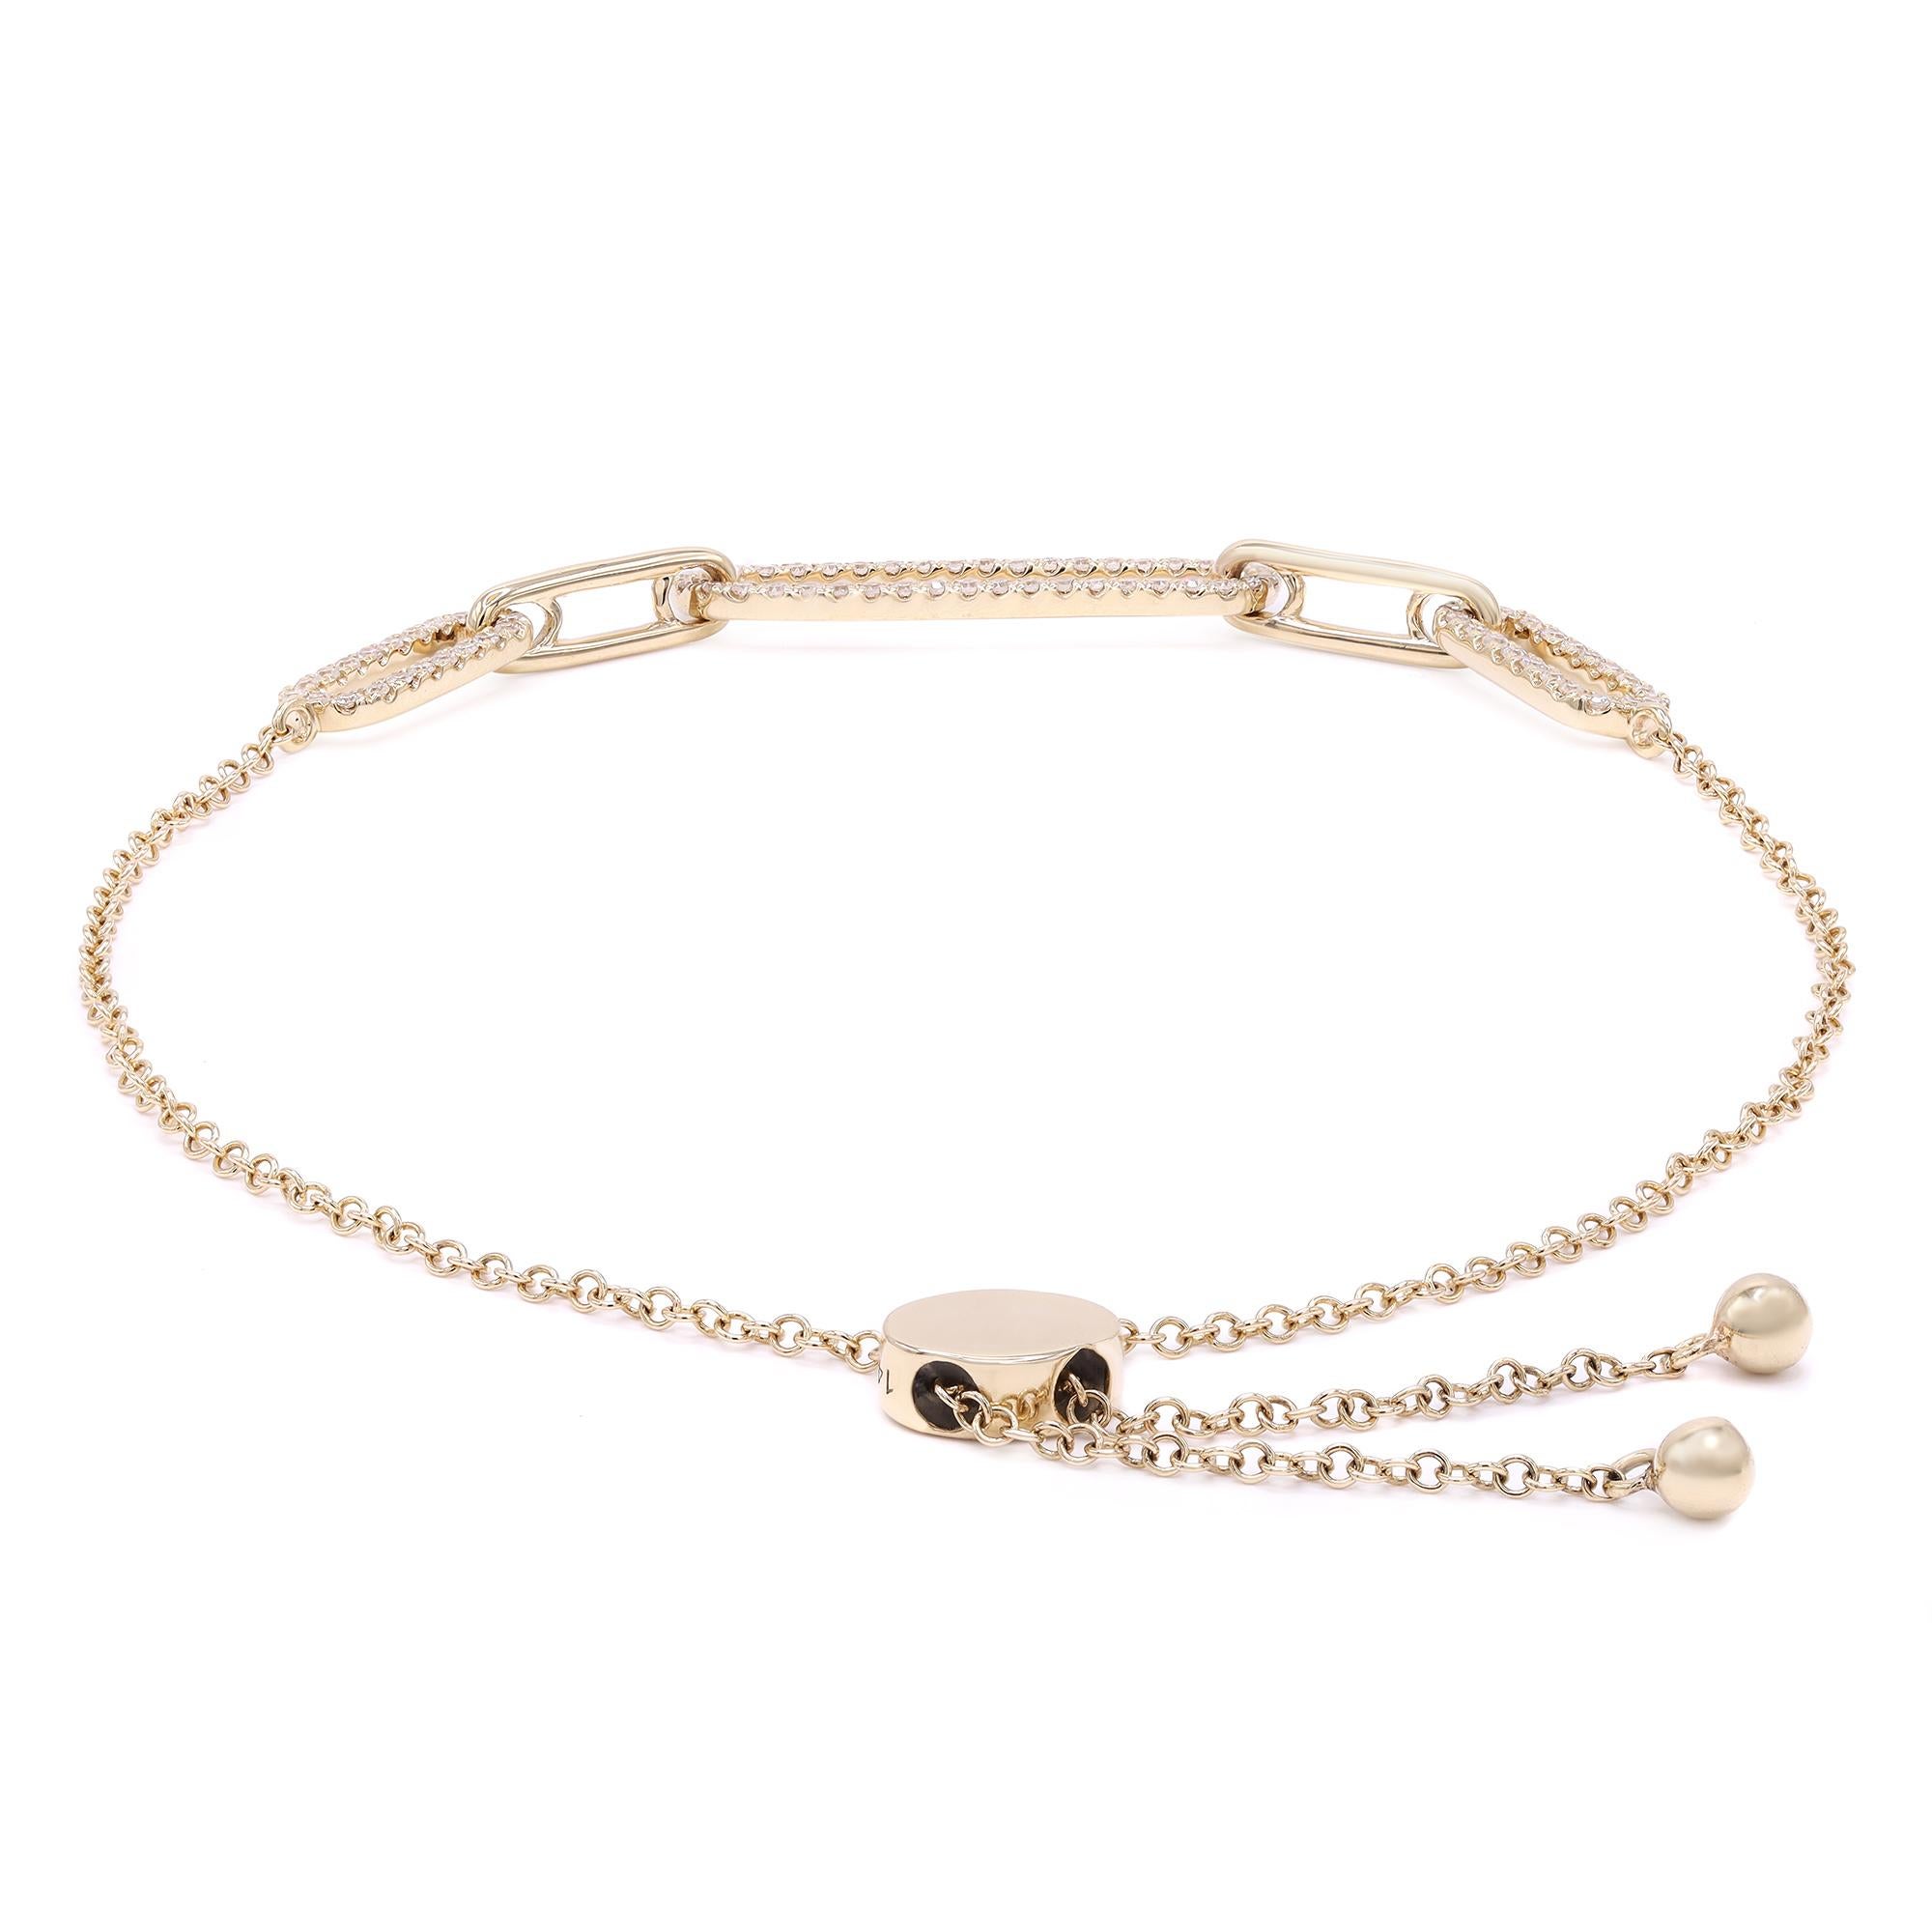 Beautiful and sleek, this diamond paper clip link bracelet is stackable and easy to wear with adjustable bolo closure. It features pave set round cut diamonds set in alternating paper clip links, crafted in high polish 14k yellow gold. The total